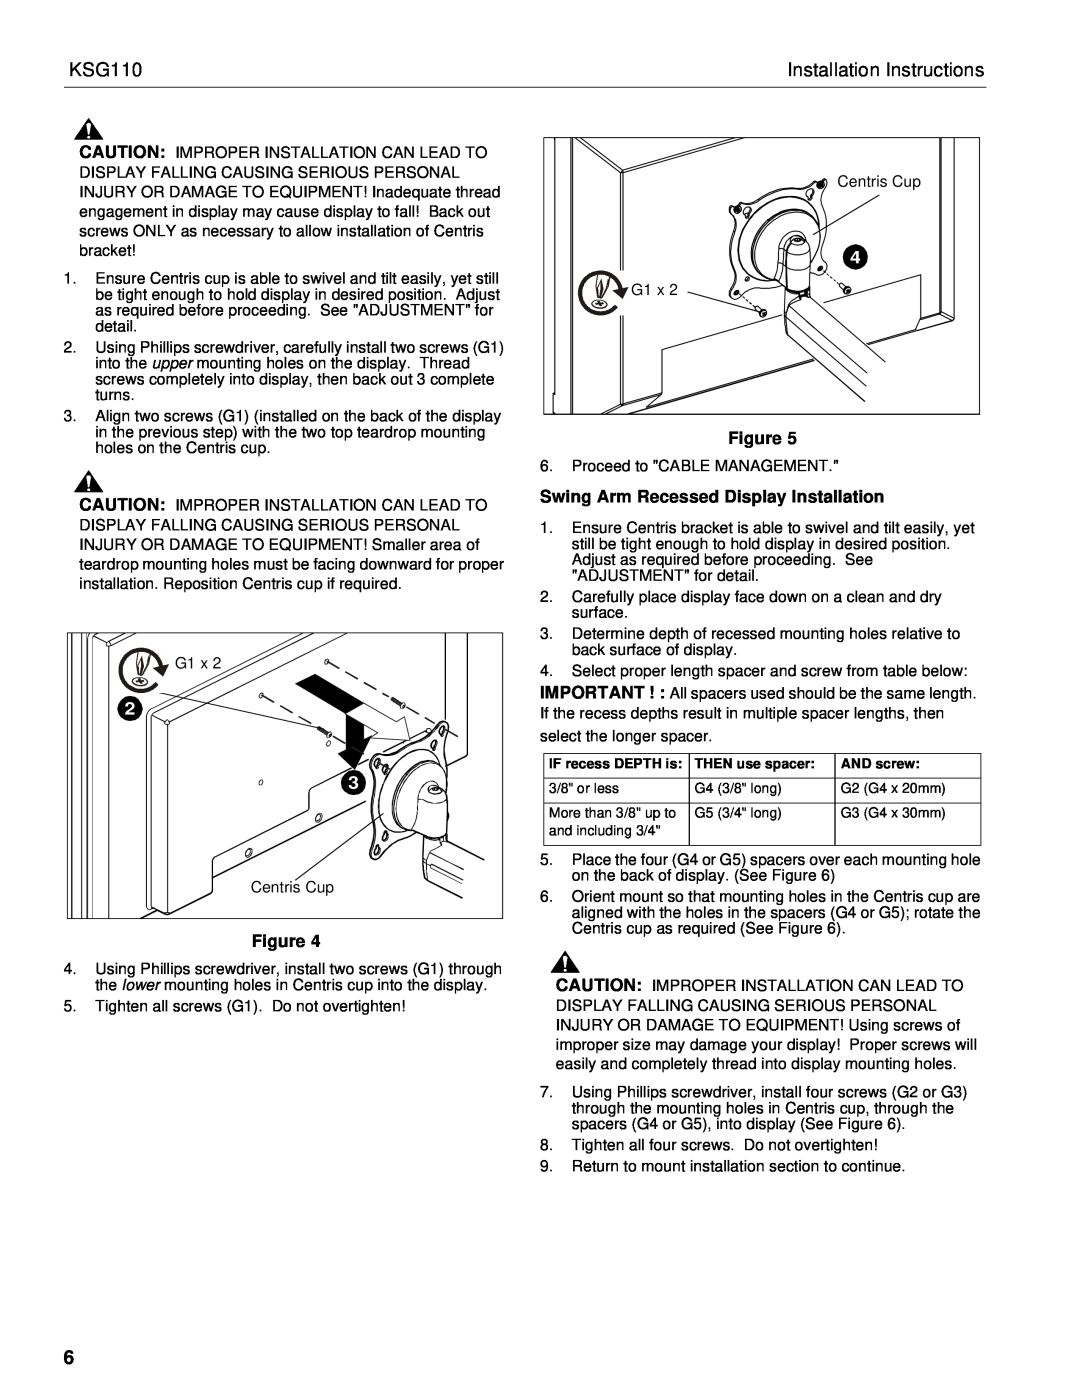 Chief Manufacturing KSG110 installation instructions Swing Arm Recessed Display Installation, Installation Instructions 